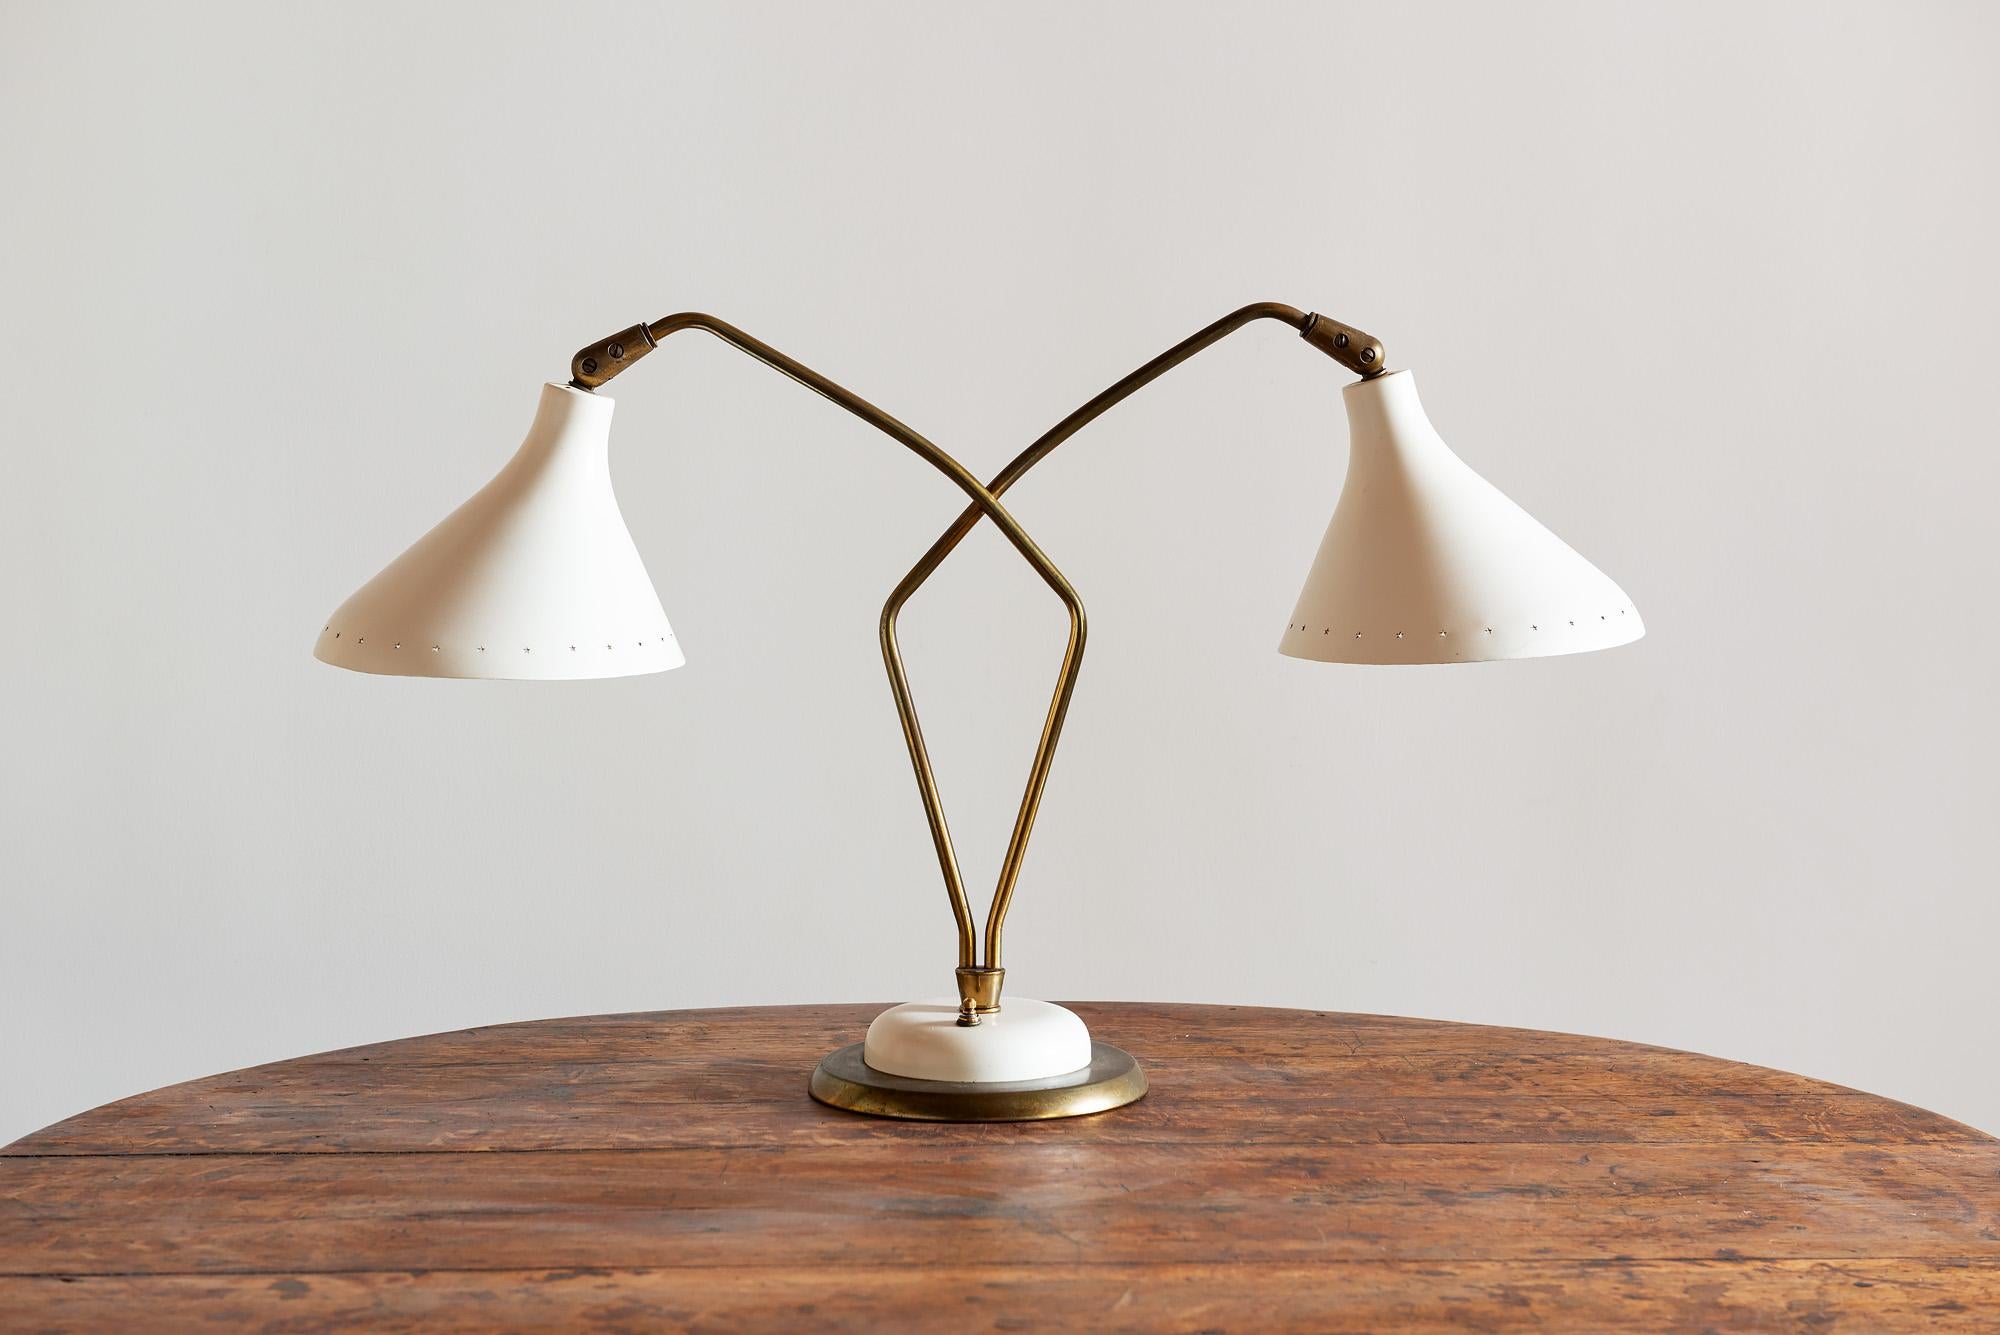 Elegant Italian table lamp with crossed brass necks and enameled cream shades perforated with small stars along the edge. Three settings, Italy, 1950s.